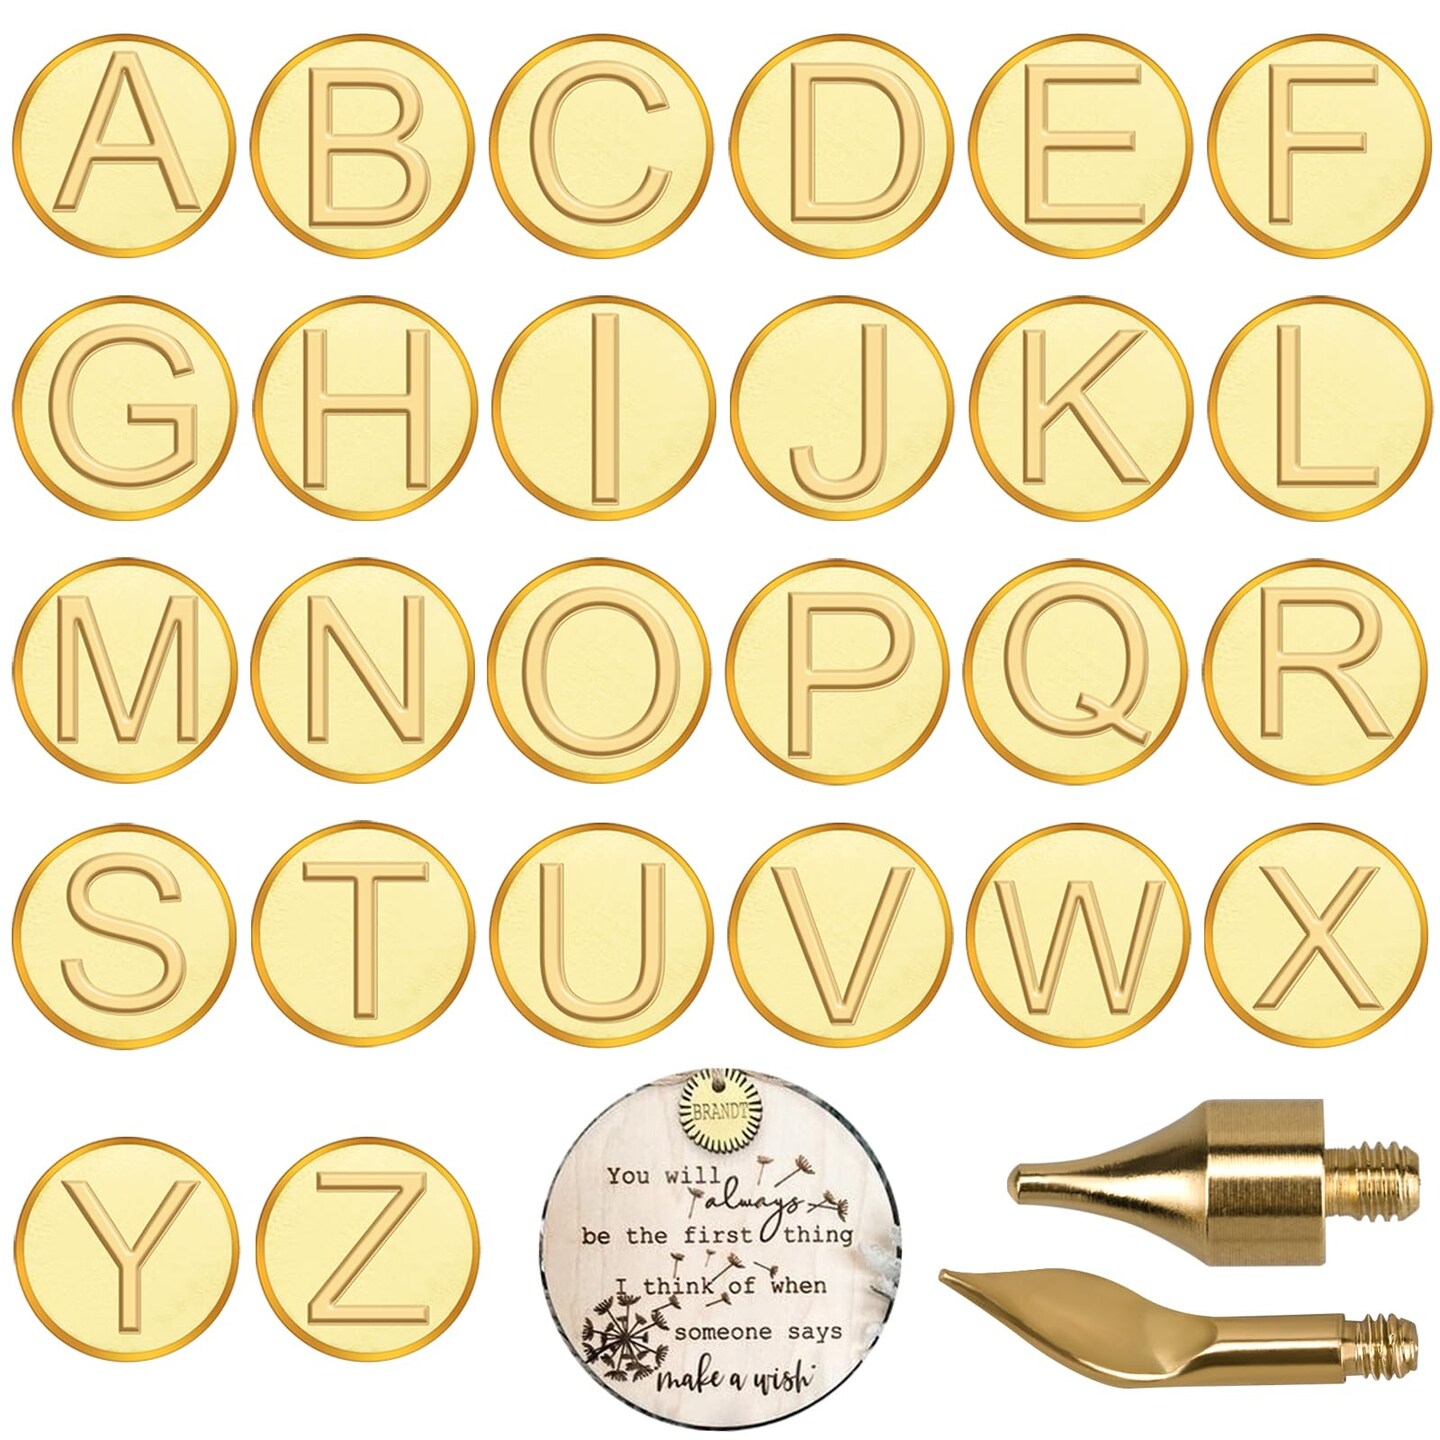 Wood Burning Tips Letters,Wood Burning Alphabet Template for Embossing and Carving Crafts